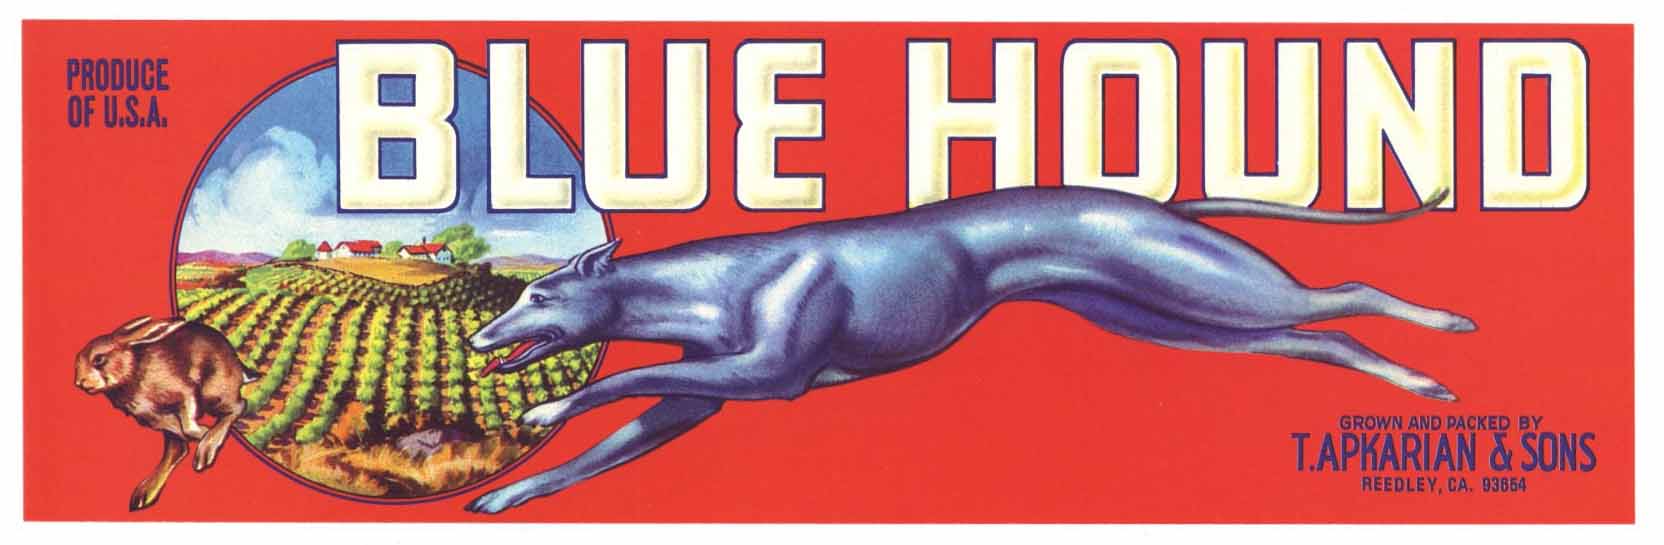 Blue Hound Brand Vintage Produce Crate Label, zipcode